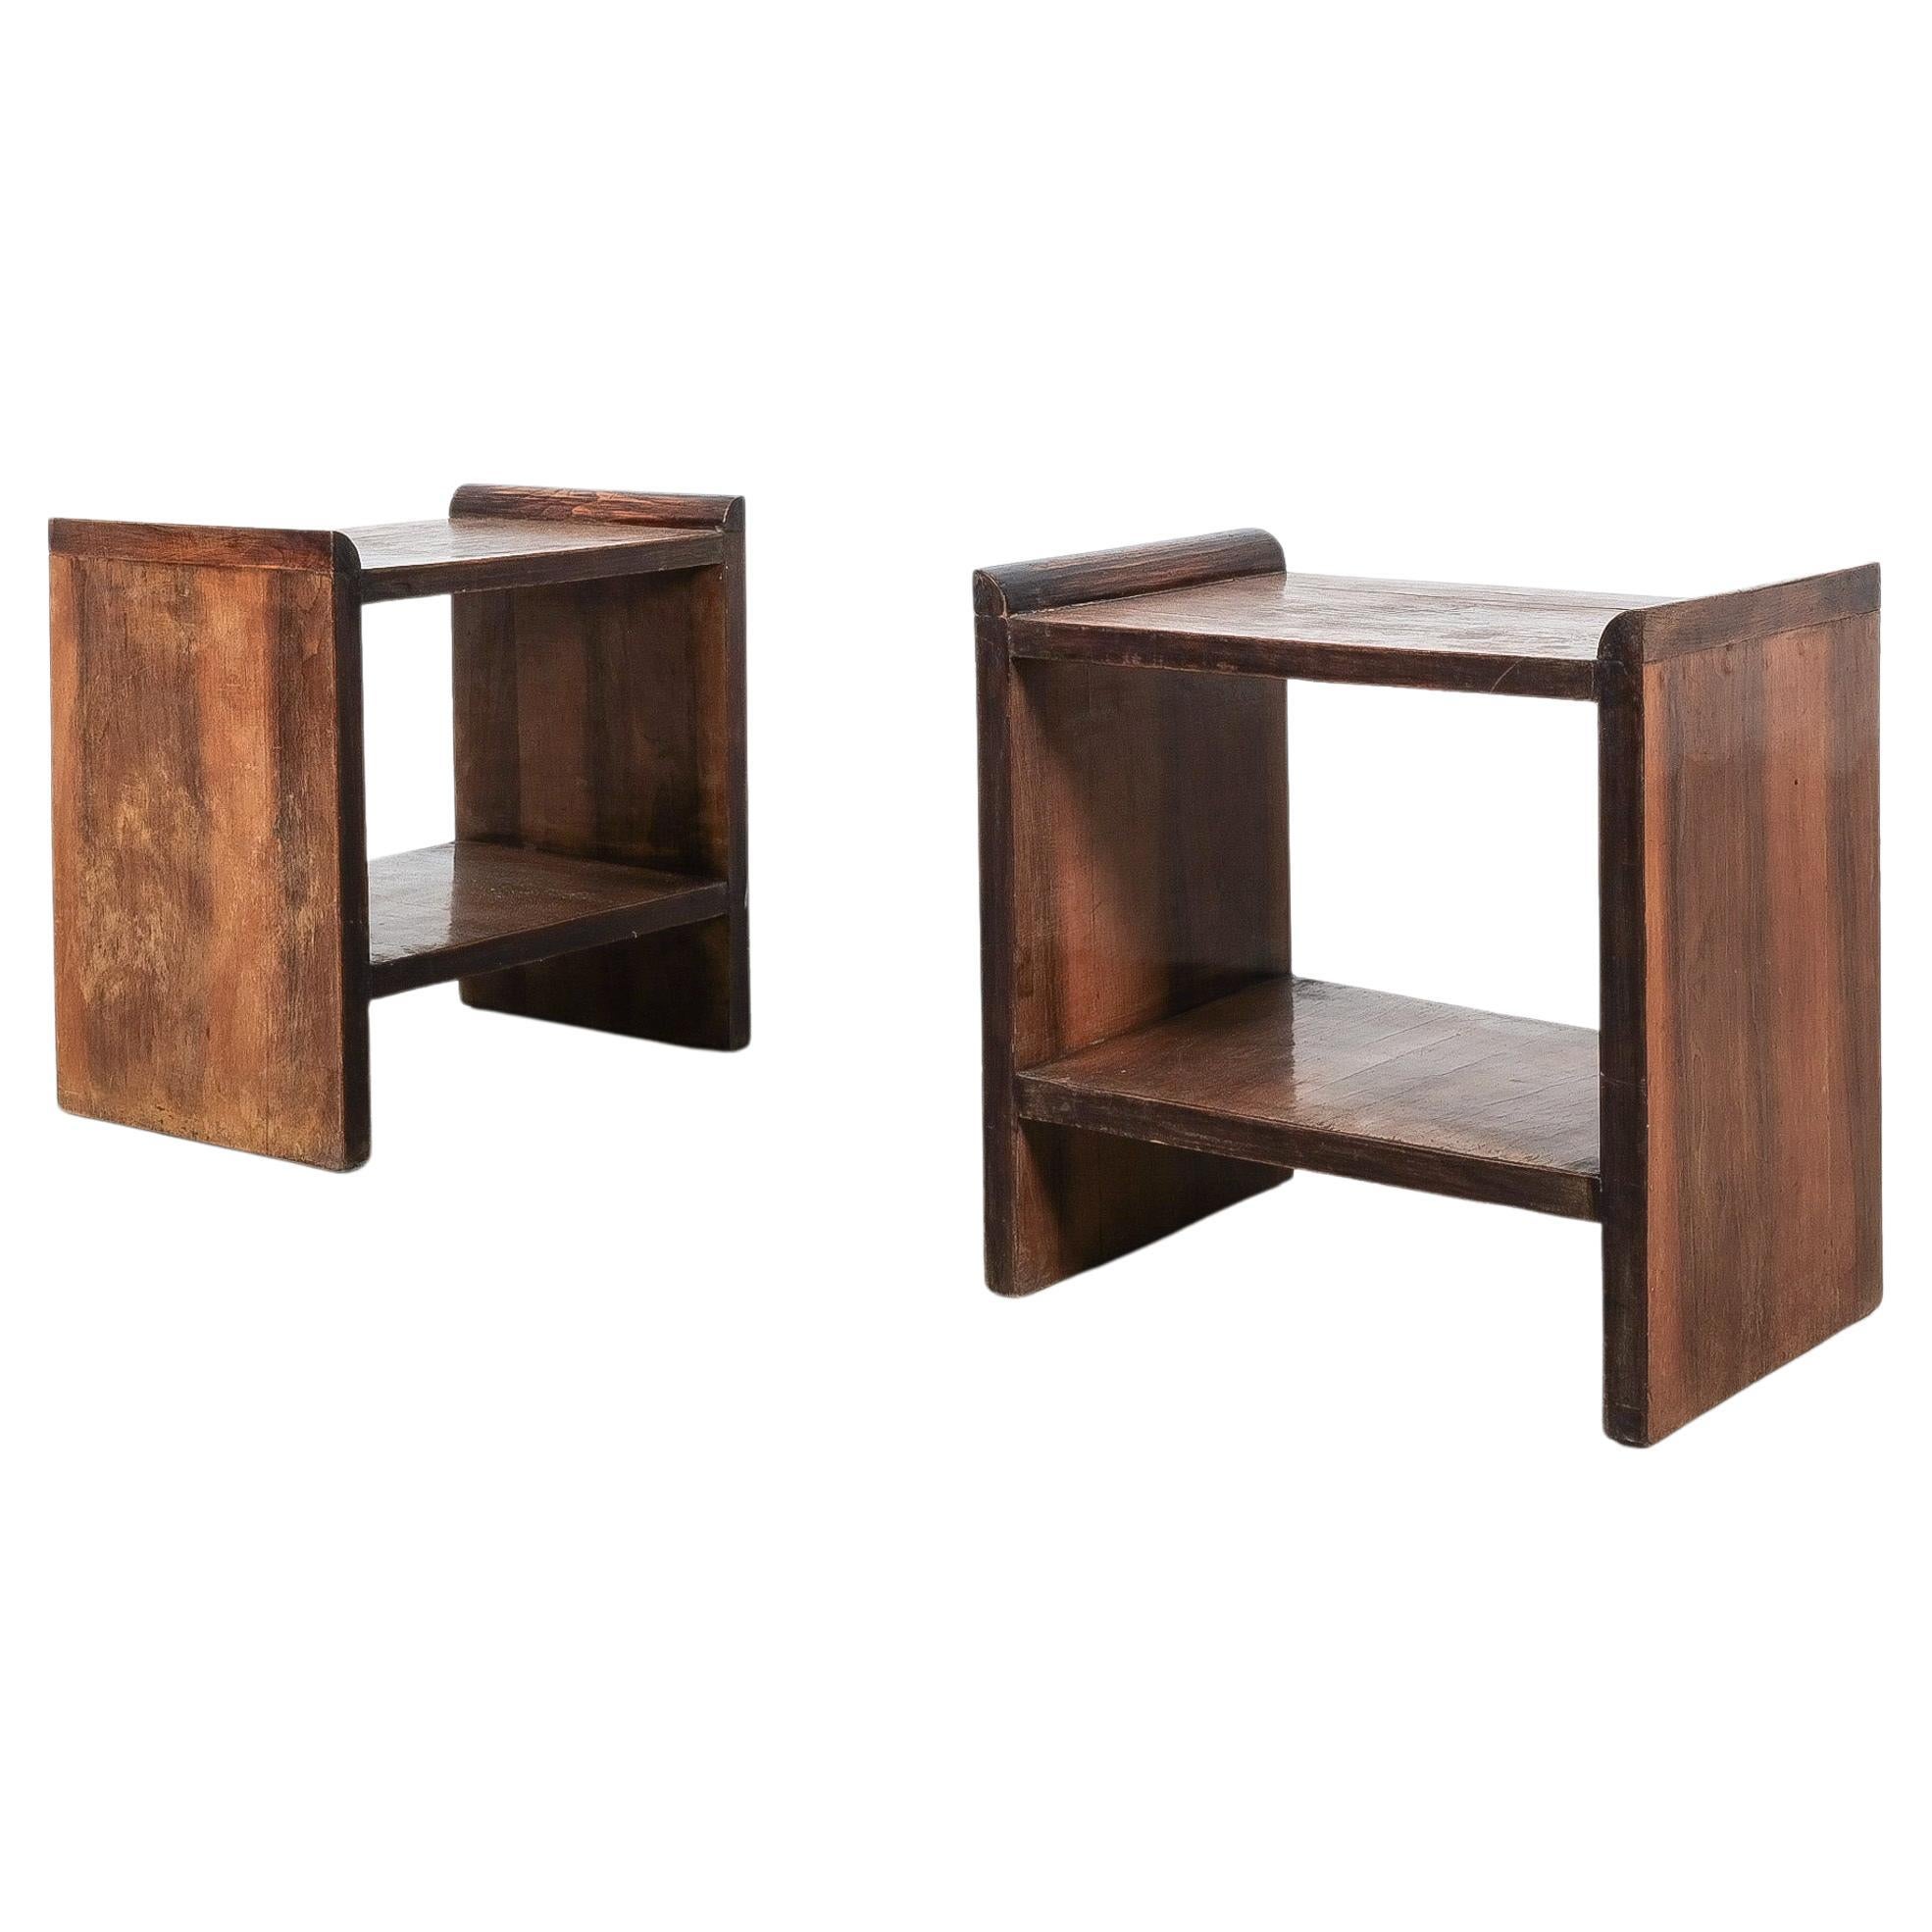 Art Deco Nightstands or Sofa Side Tables from Wood, Italy, circa 1930